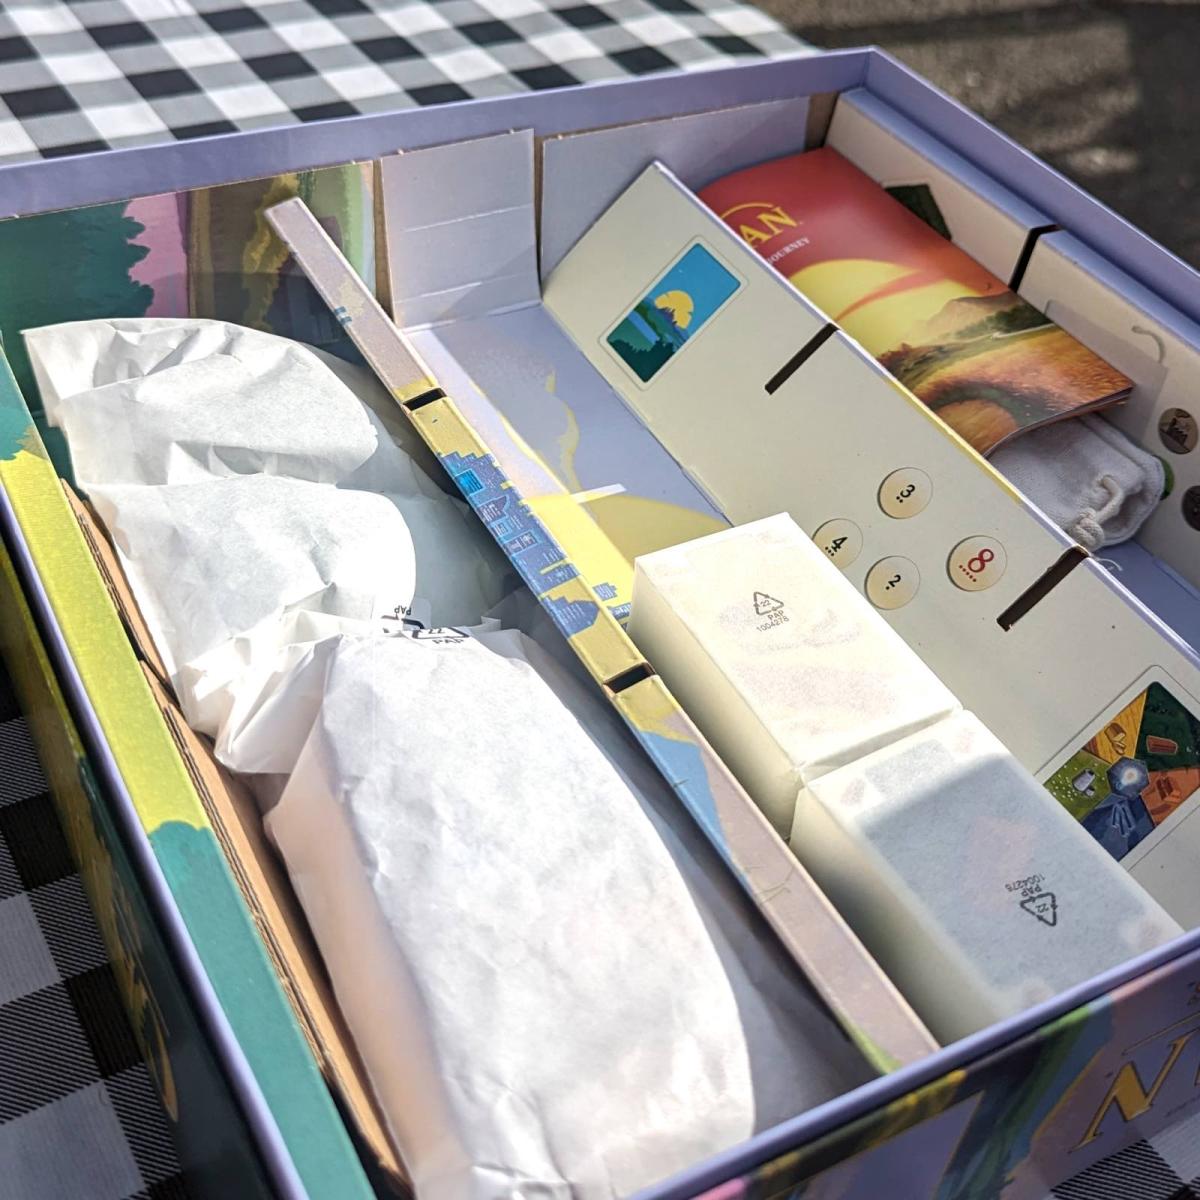 The inside of a board game box, showing card decks and other items wrapped in paper